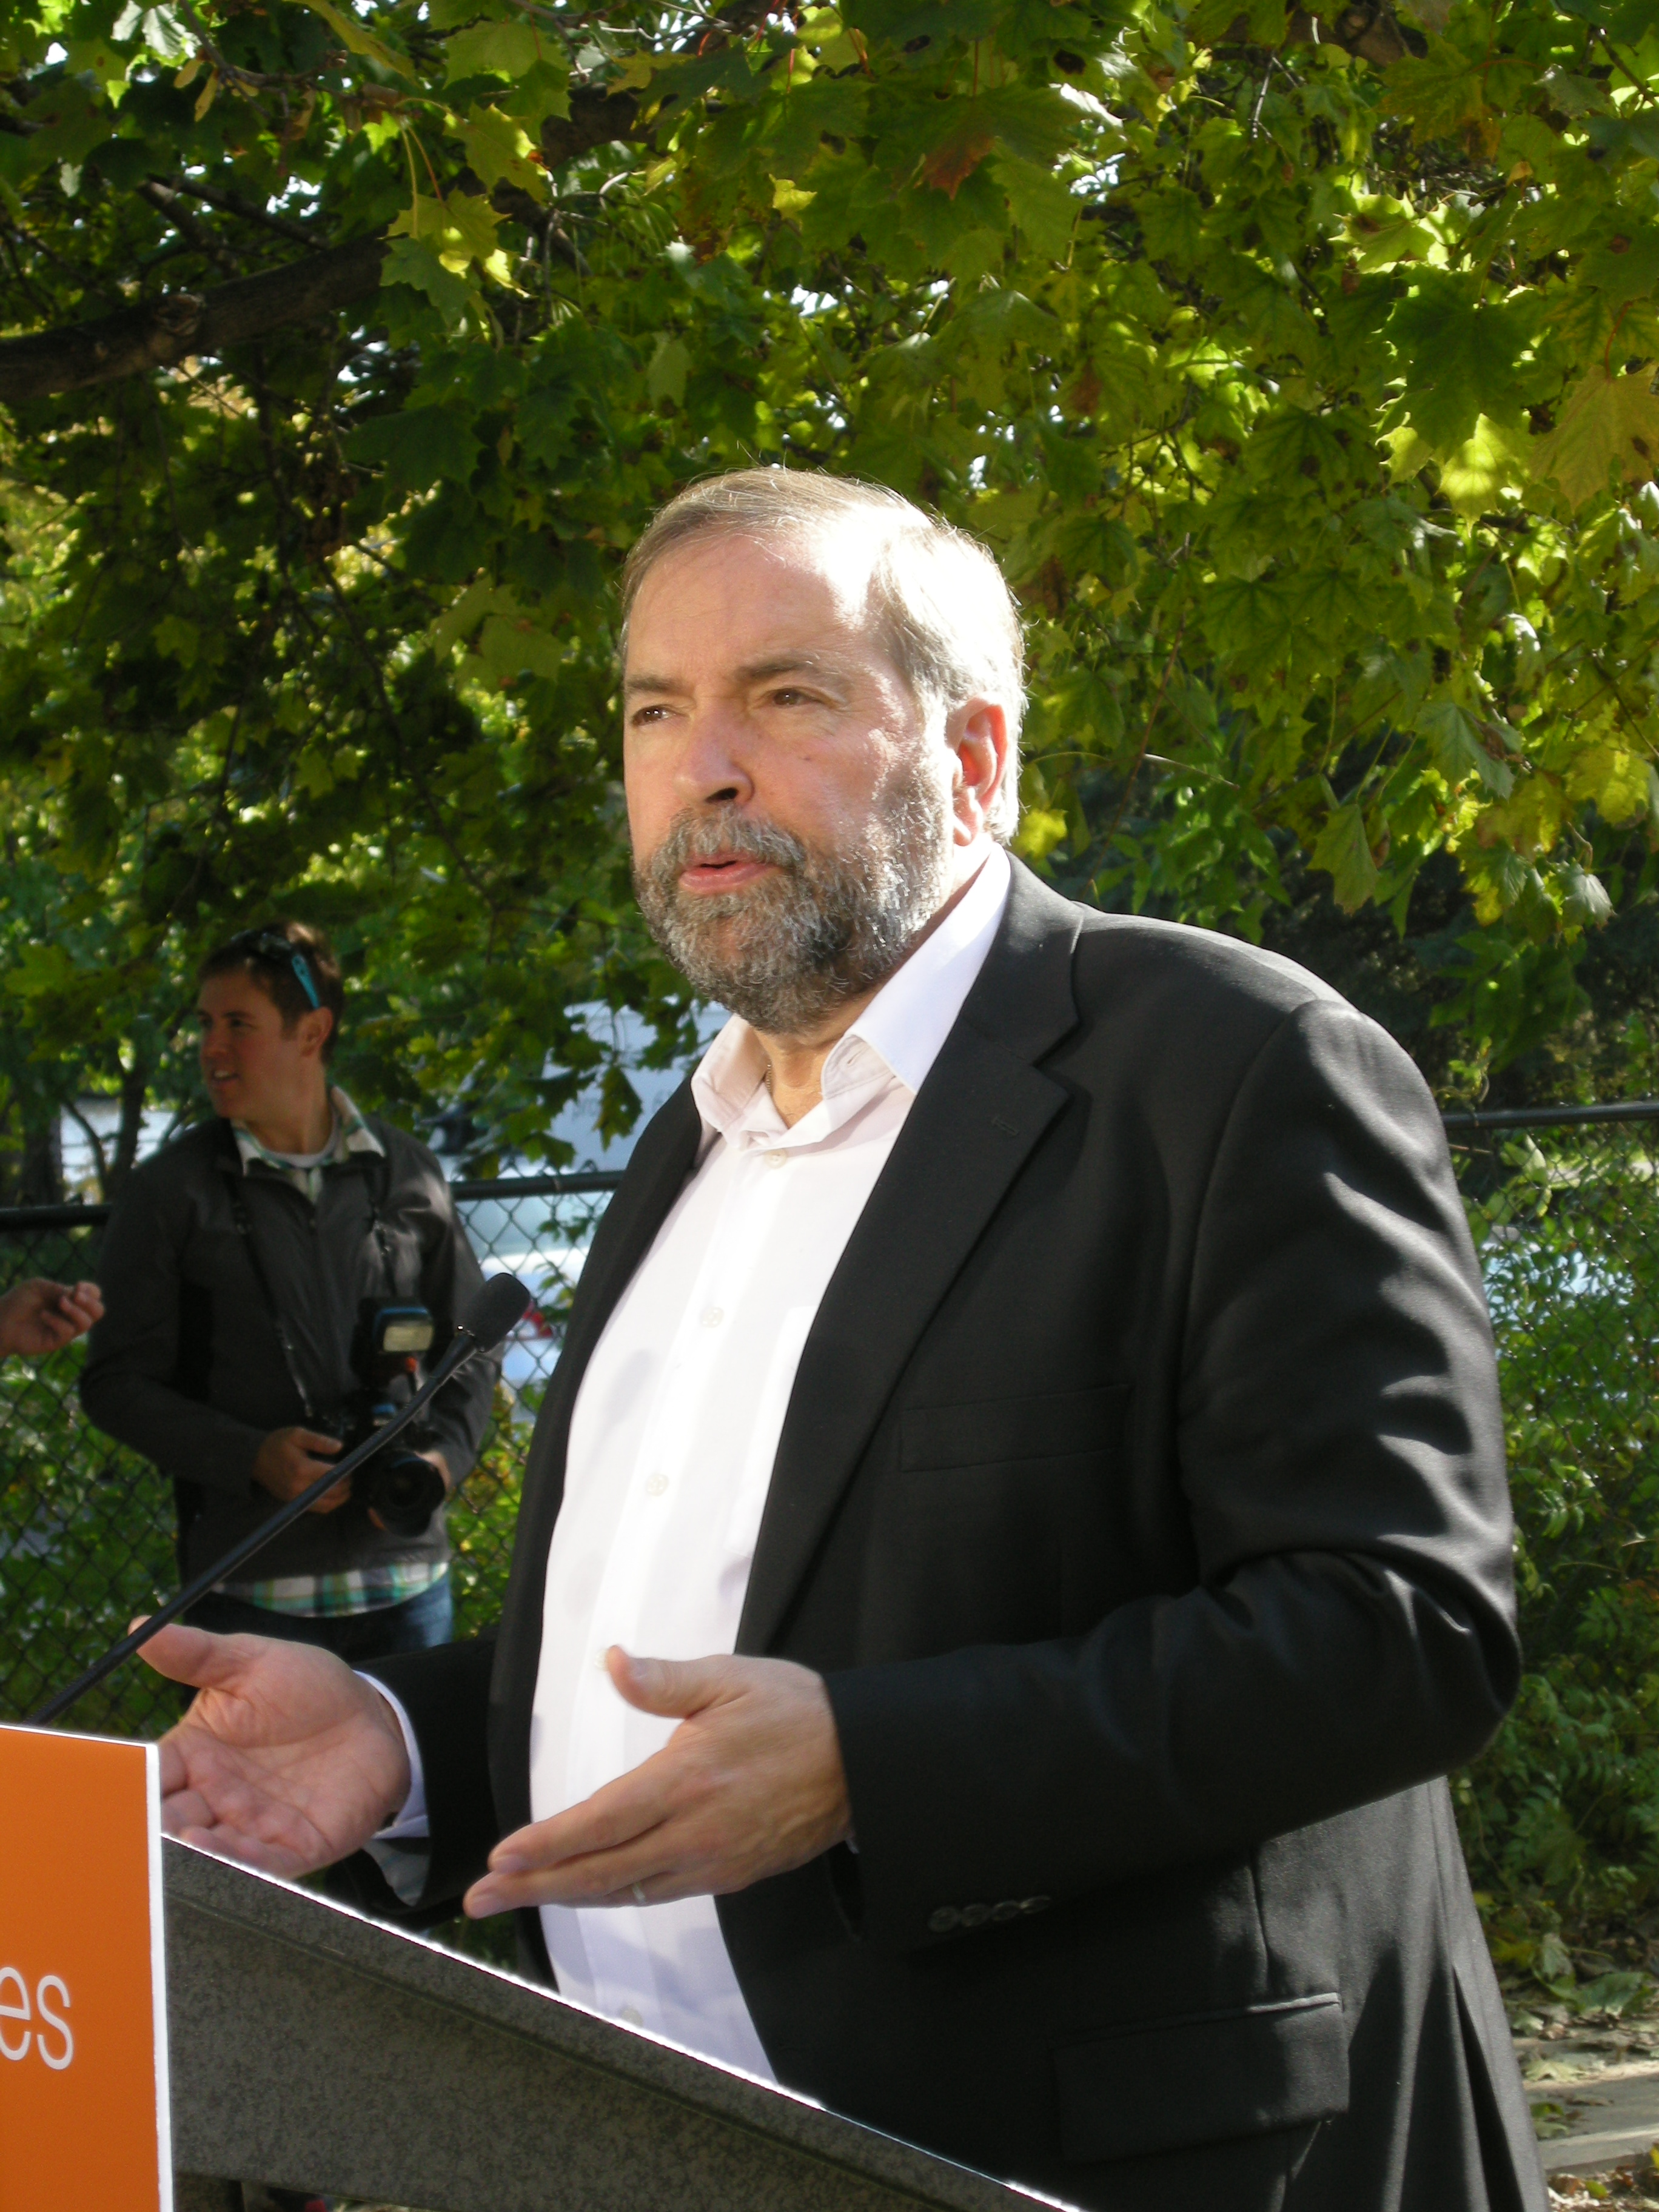 Harper's reduced surplus poses a challenge for Mulcair (pictured) and Trudeau